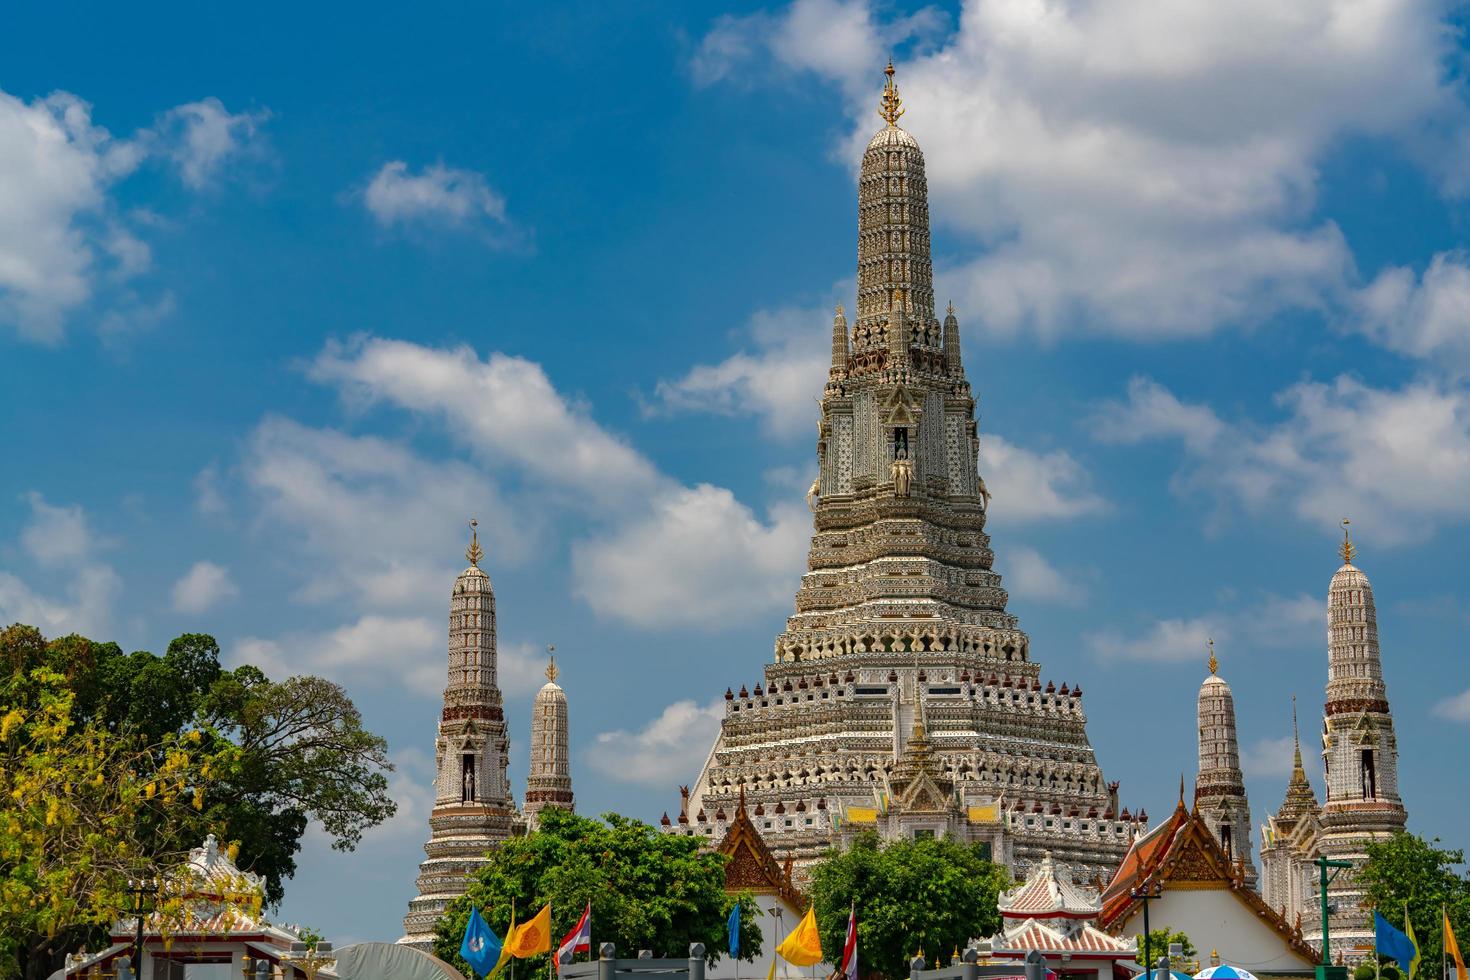 Wat Arun Ratchawararam with beautiful blue sky and white clouds. Wat Arun buddhist temple is the landmark in Bangkok, Thailand. Attraction art and ancient architecture in Bangkok, Thailand. photo